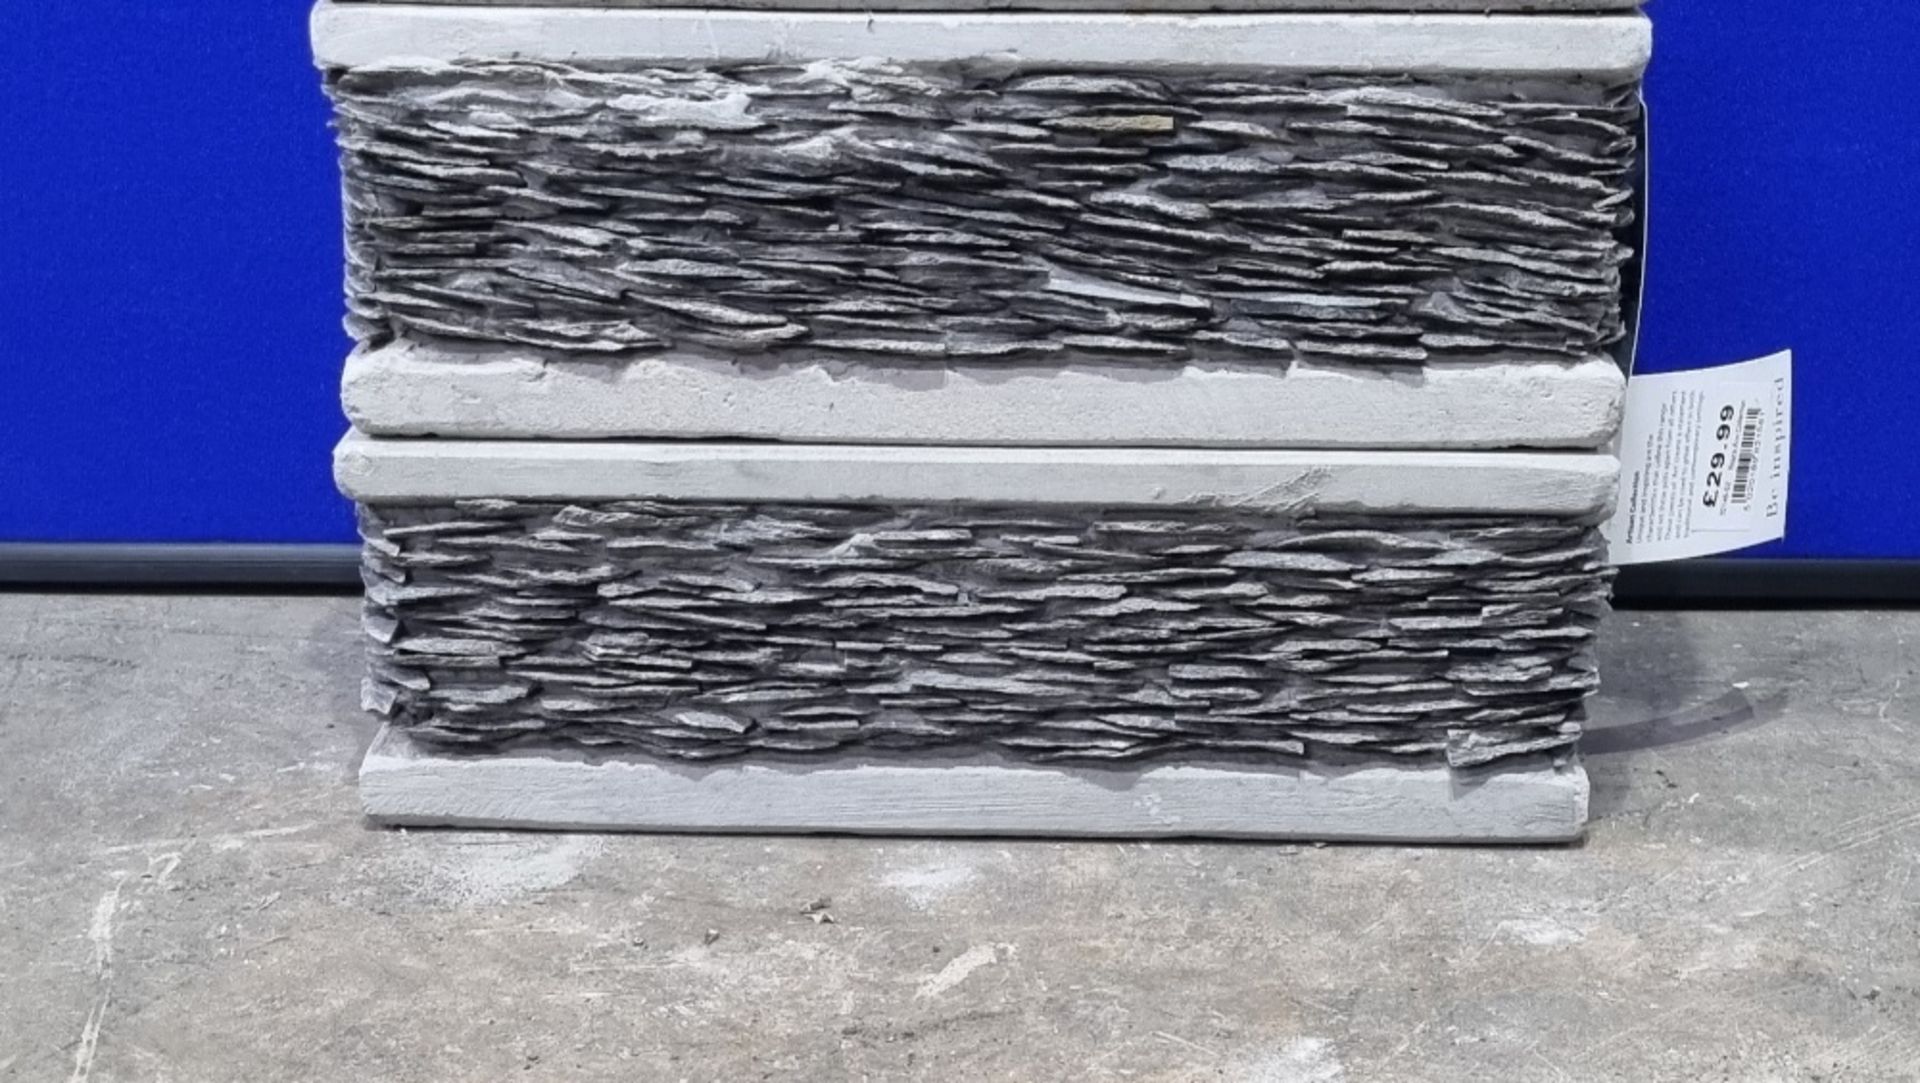 2 x Mims Artisan Rocca Ann Collection 82146-S2 Slate Planters | 130mm x 410mm | RRP £29.99 each